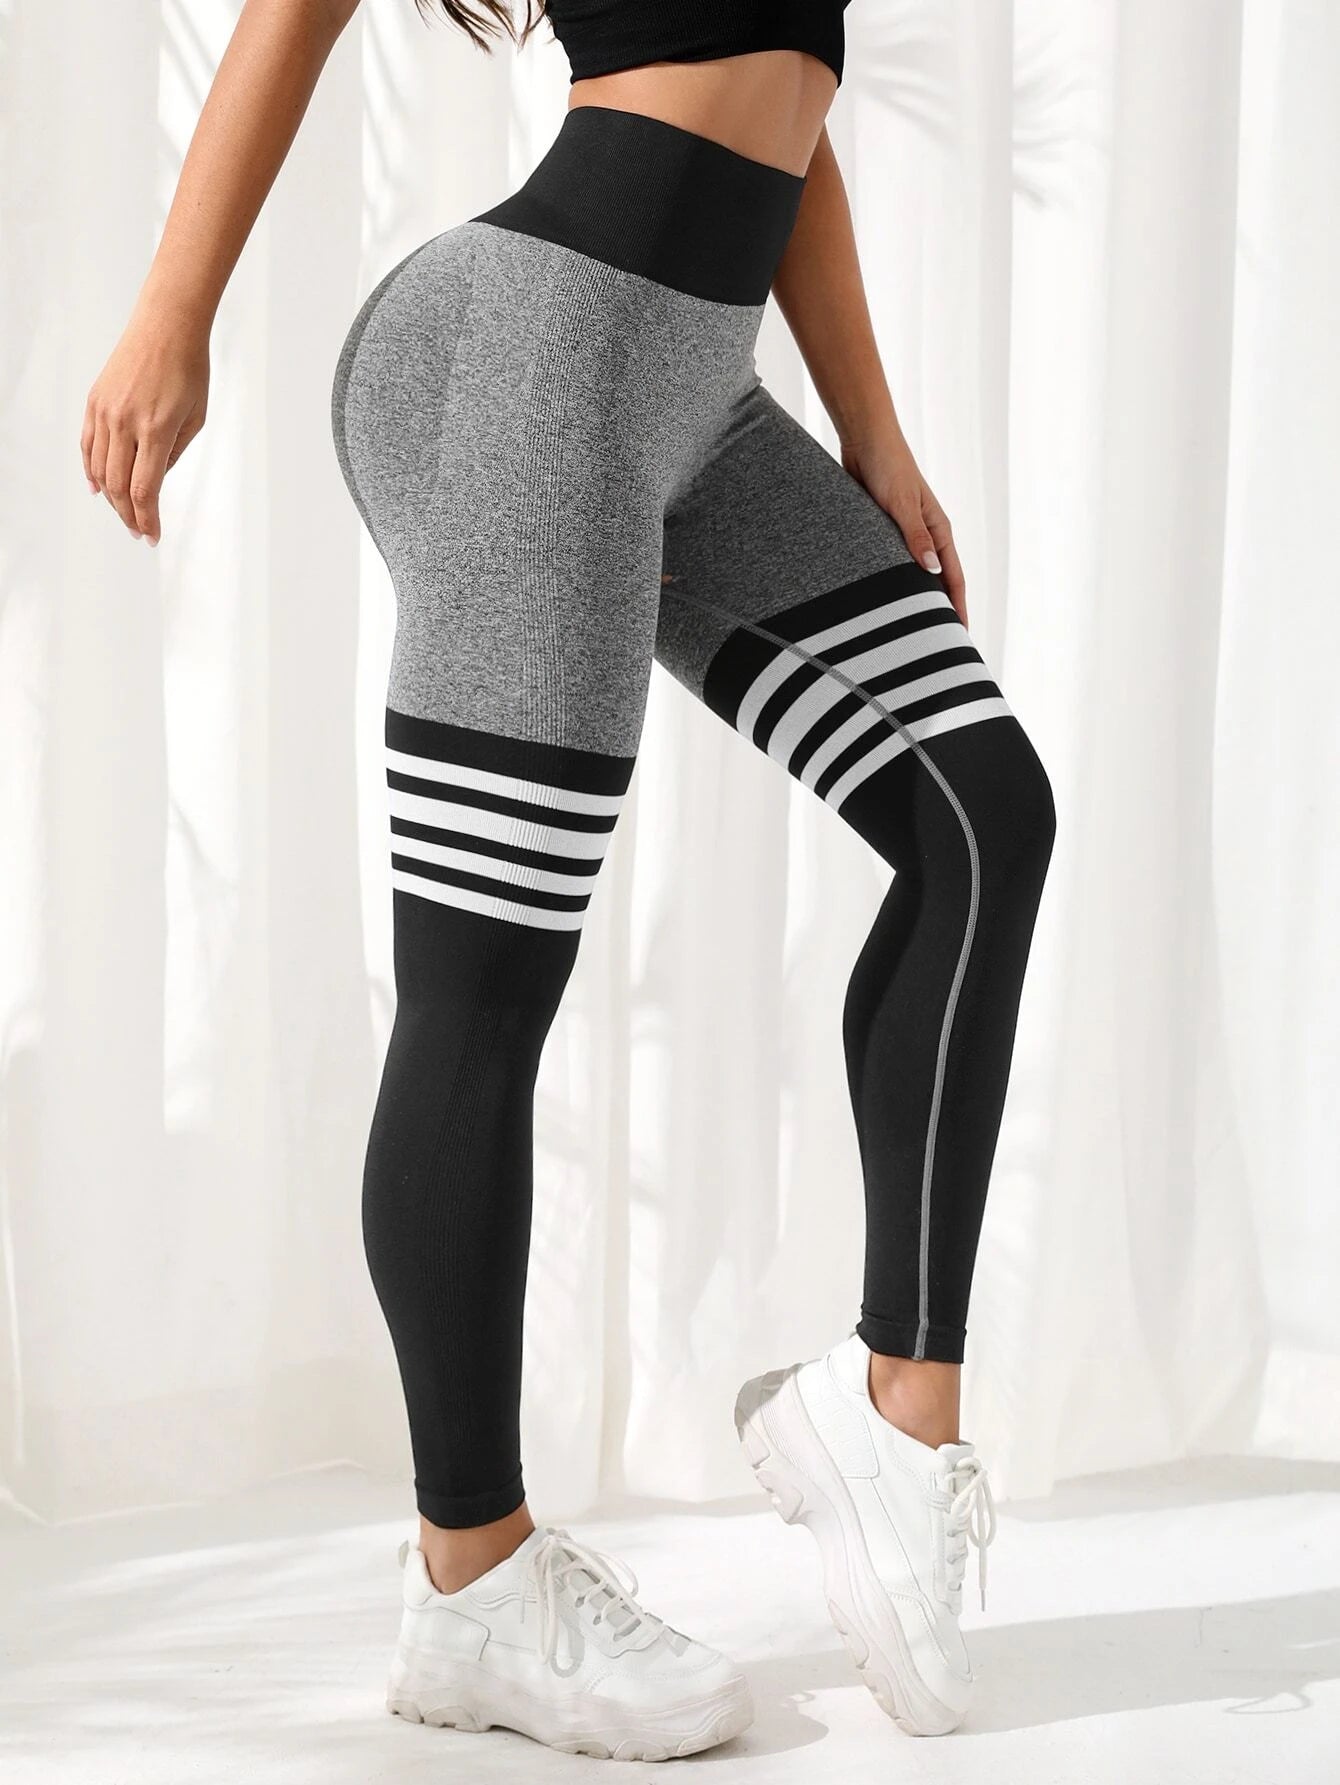 Striped Yoga Pants Women's Maternity Leggings over The Belly Pregnancy  Active Workout Yoga Tights Pants Yoga Leggings Ladies Running Waist Fitness